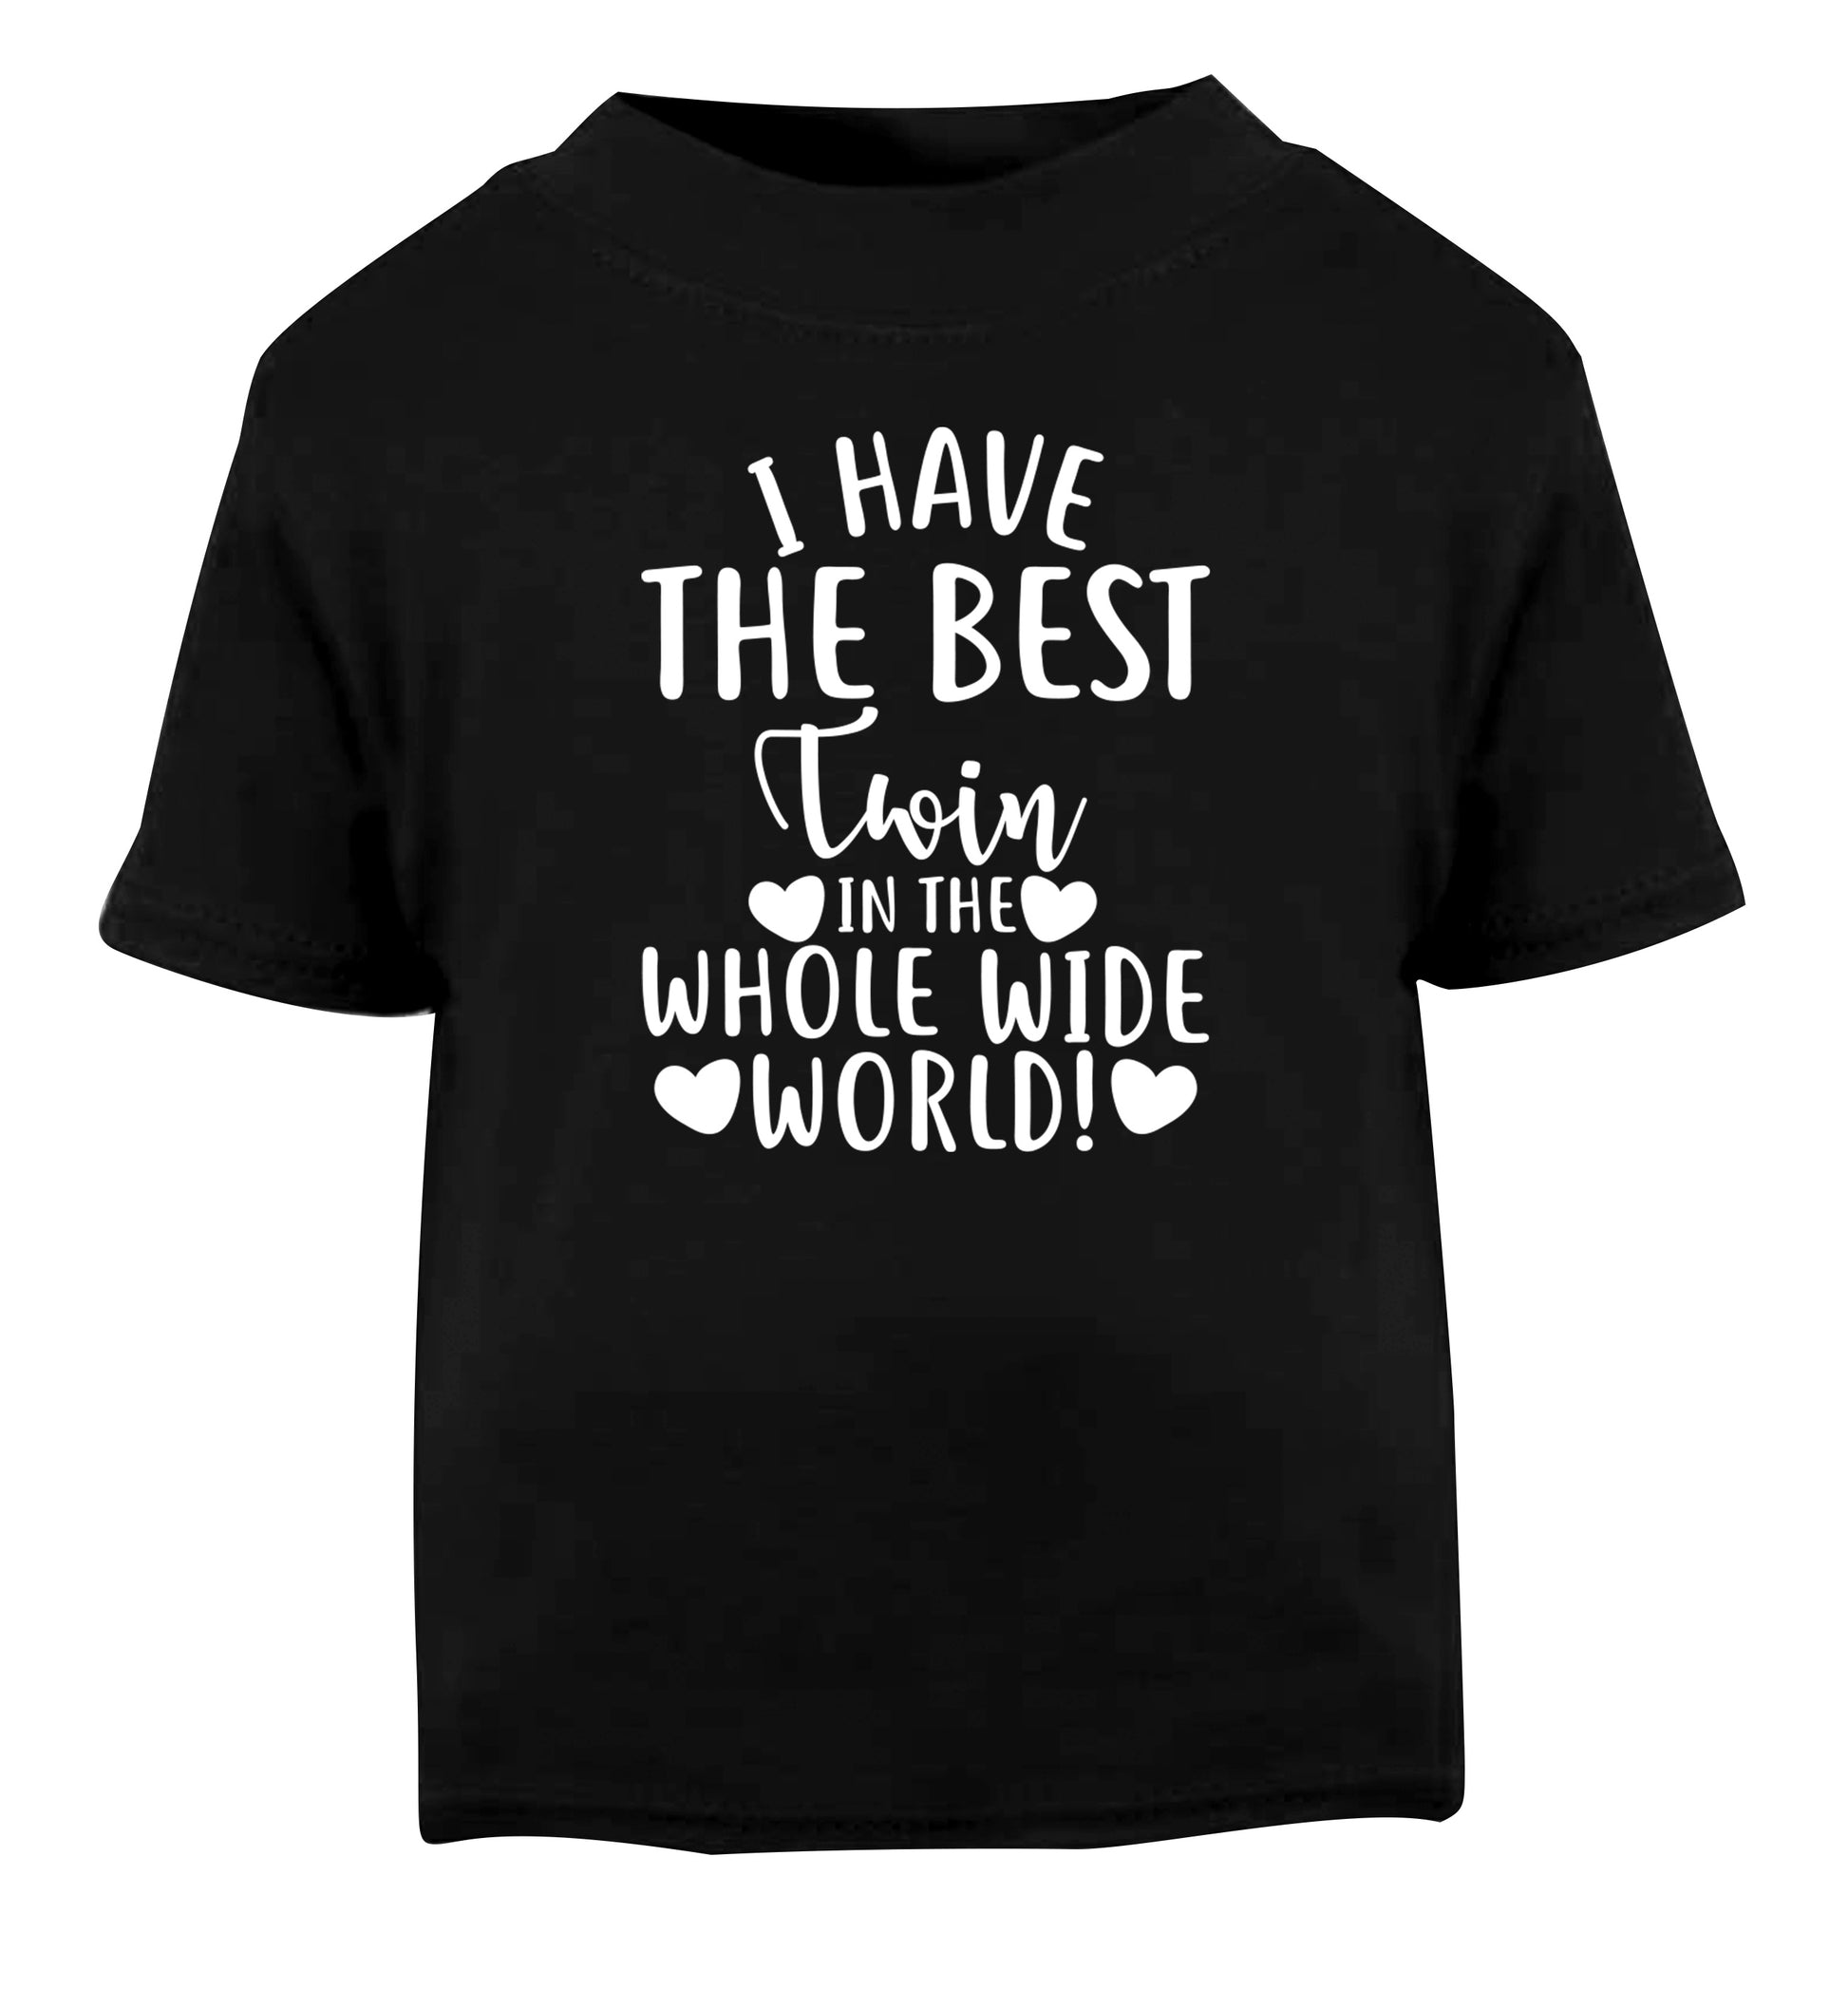 I have the best twin in the whole wide world! Black Baby Toddler Tshirt 2 years